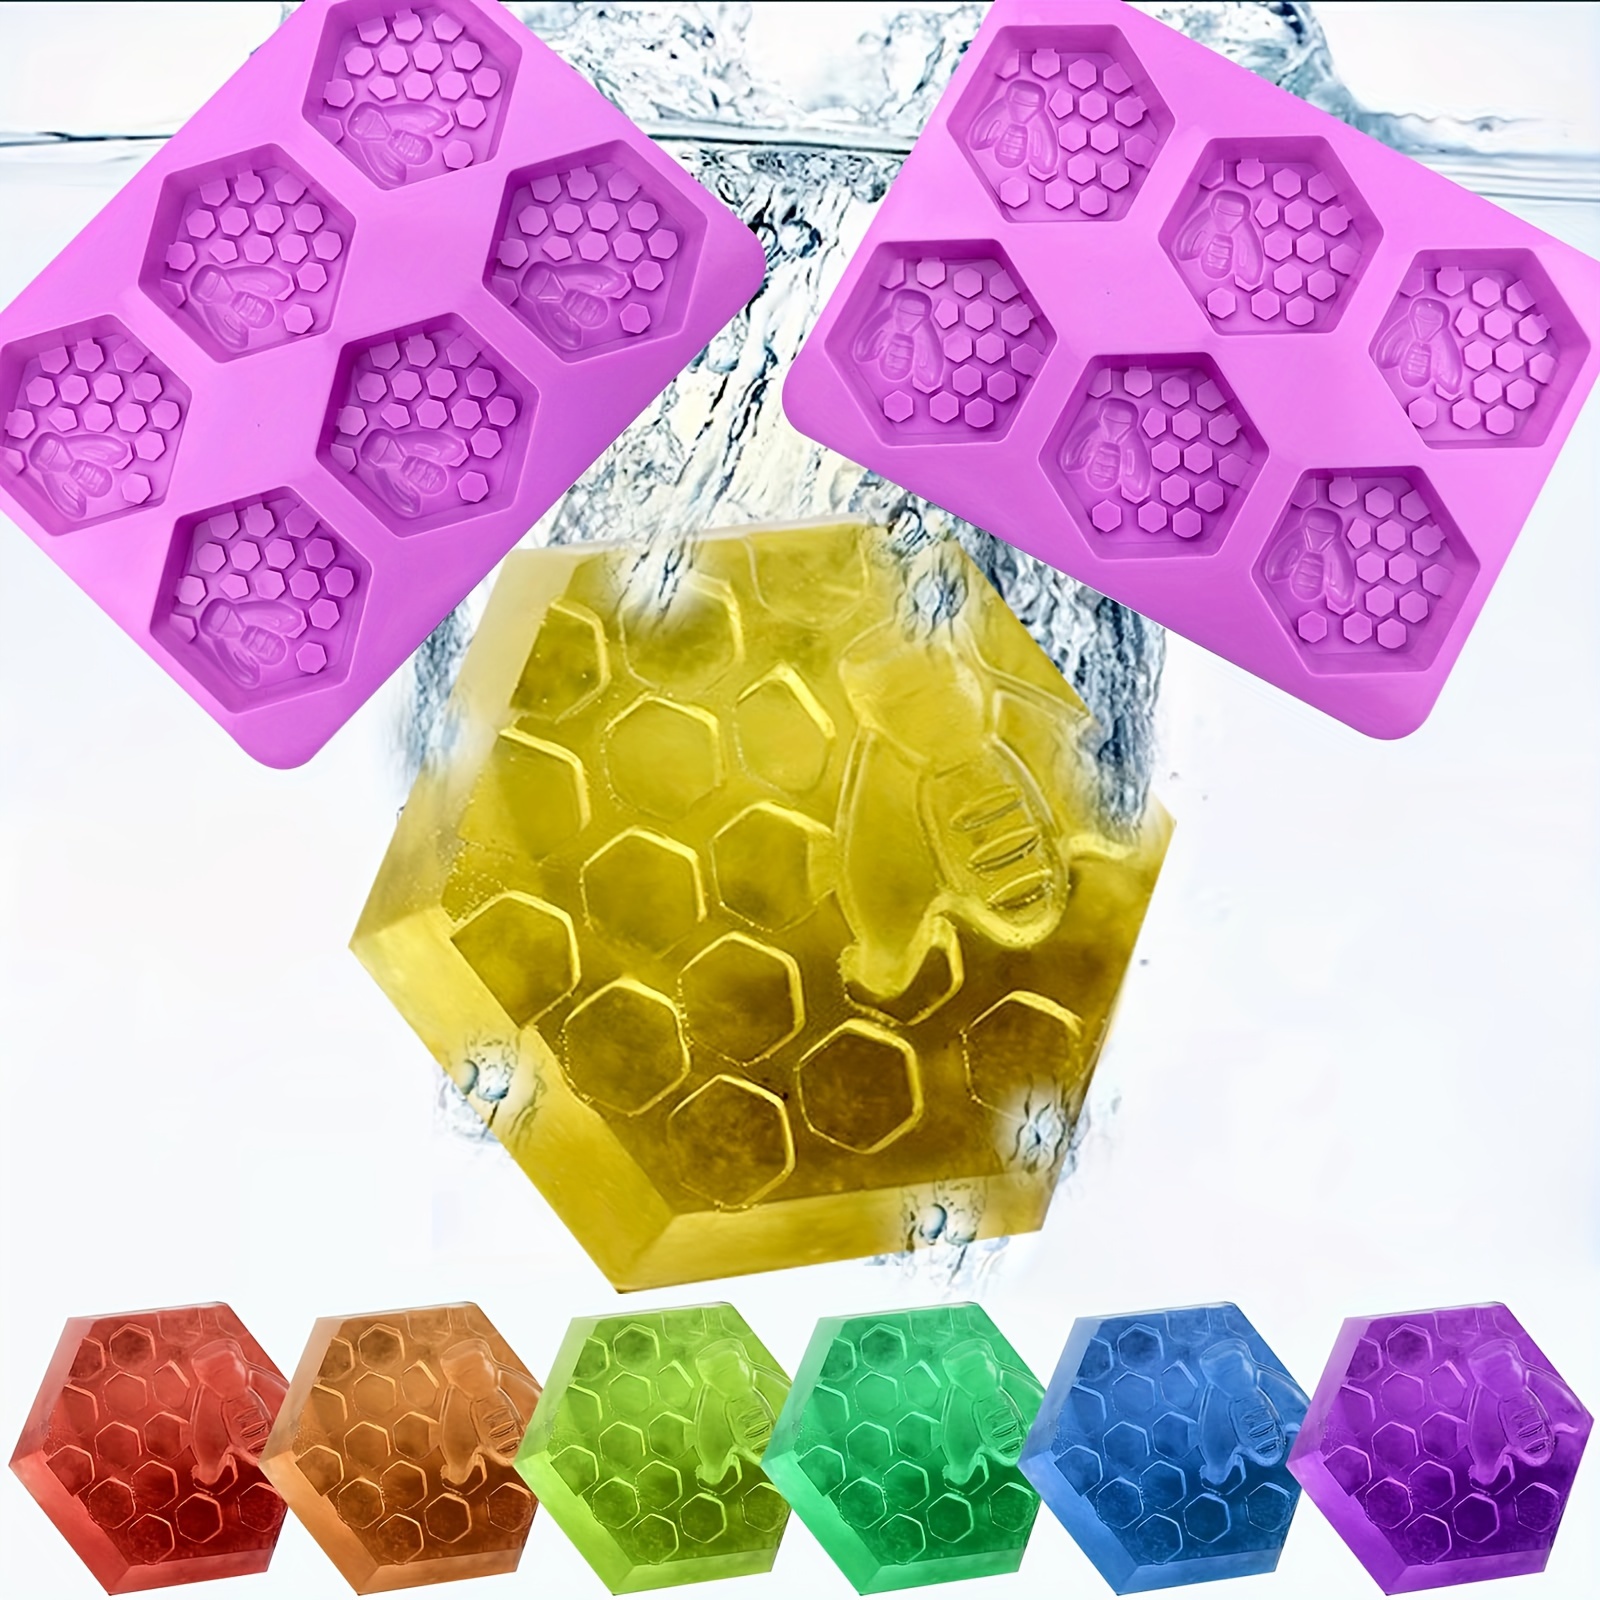 3d Hexagon Bee Honeycomb Silicone Molds For Handmade Soap And Cake